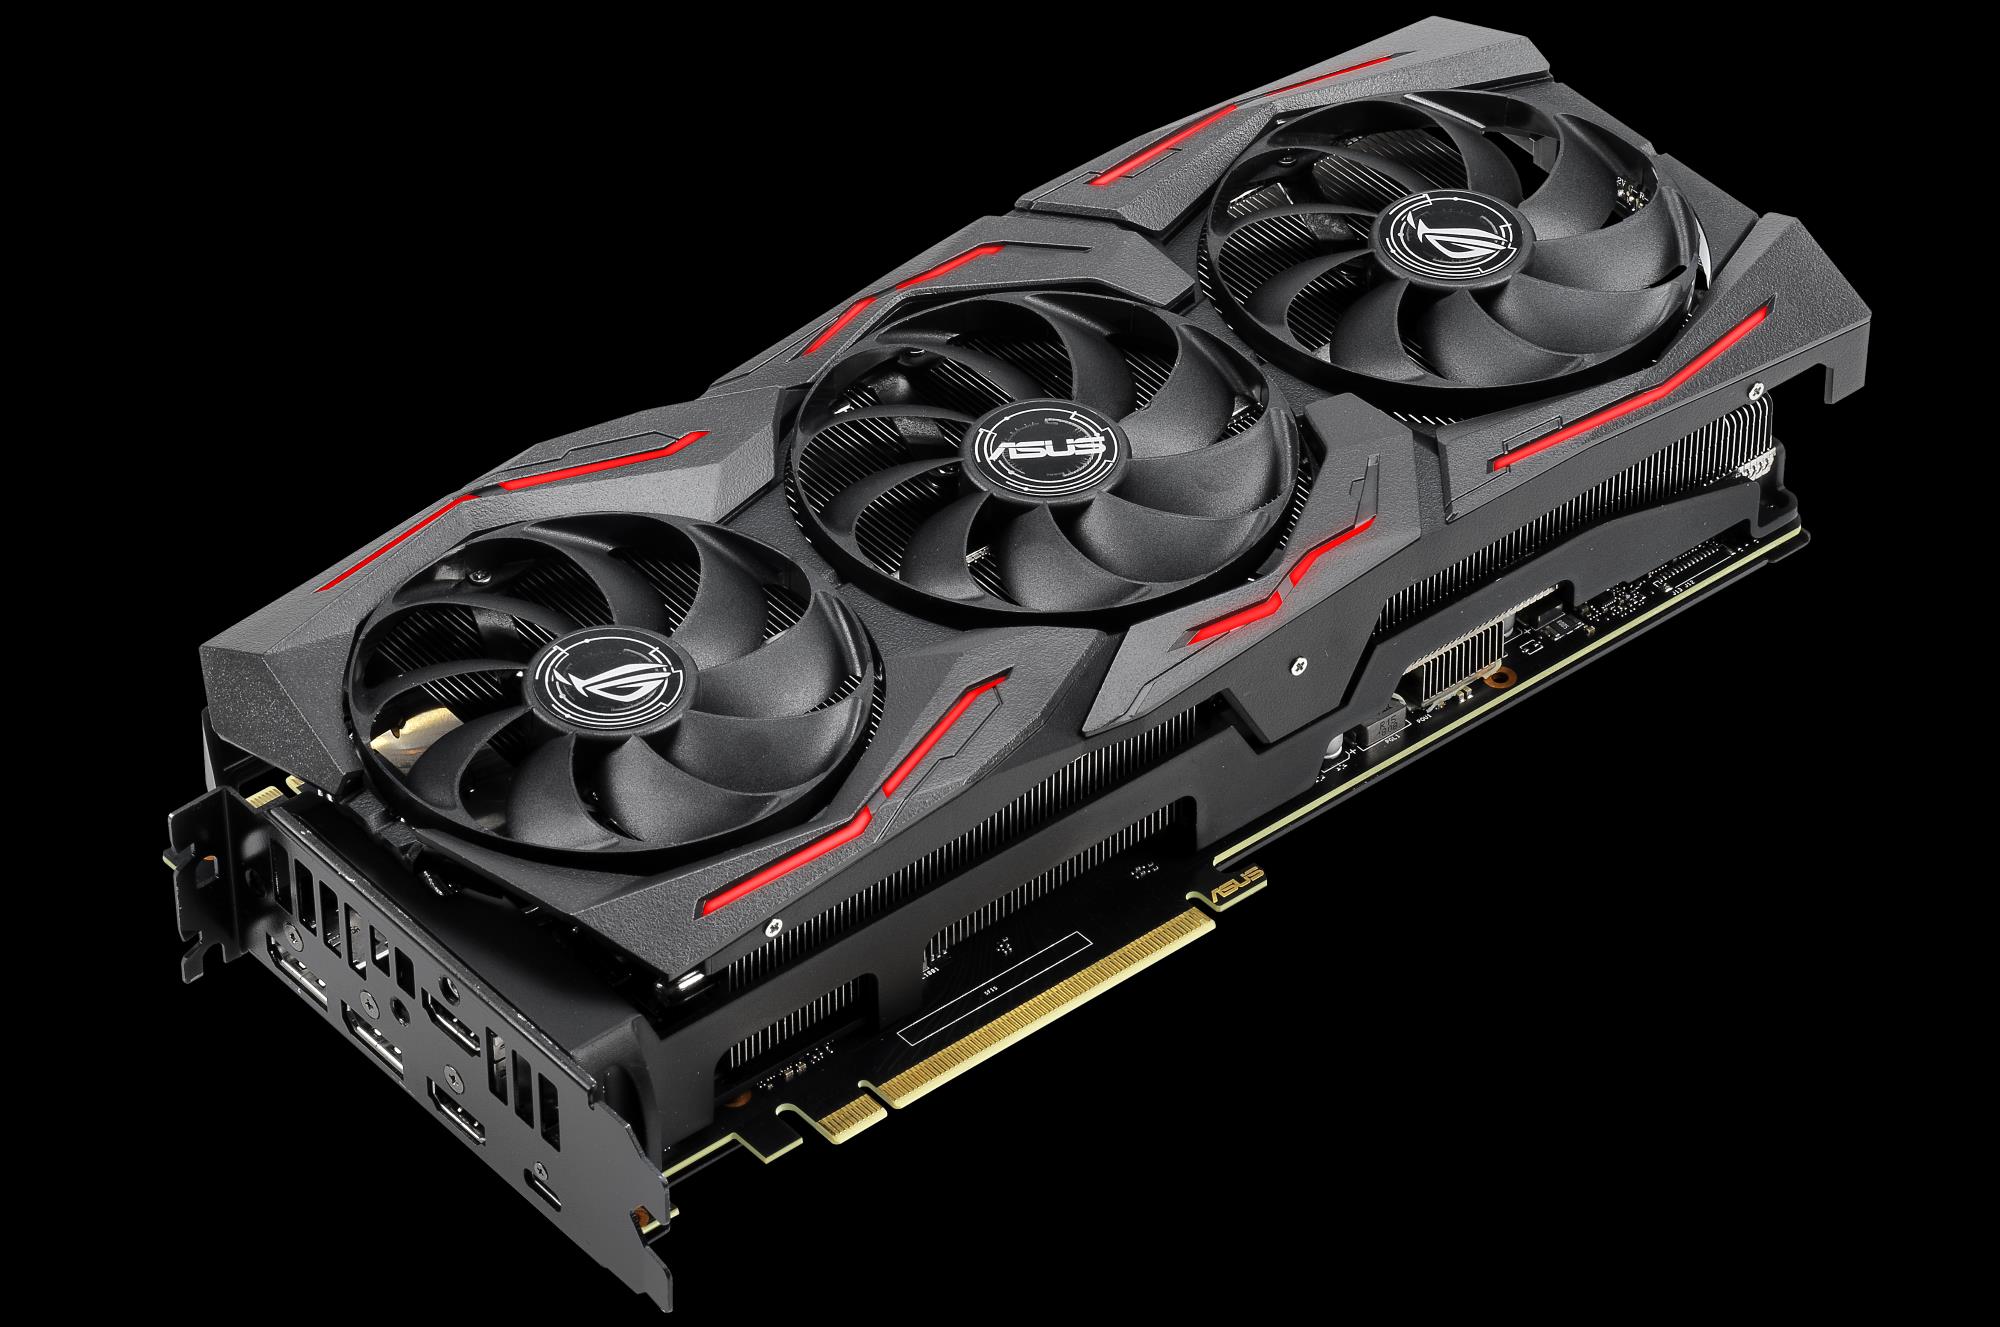 Supercharge your game with ASUS GeForce RTX SUPER graphics cards